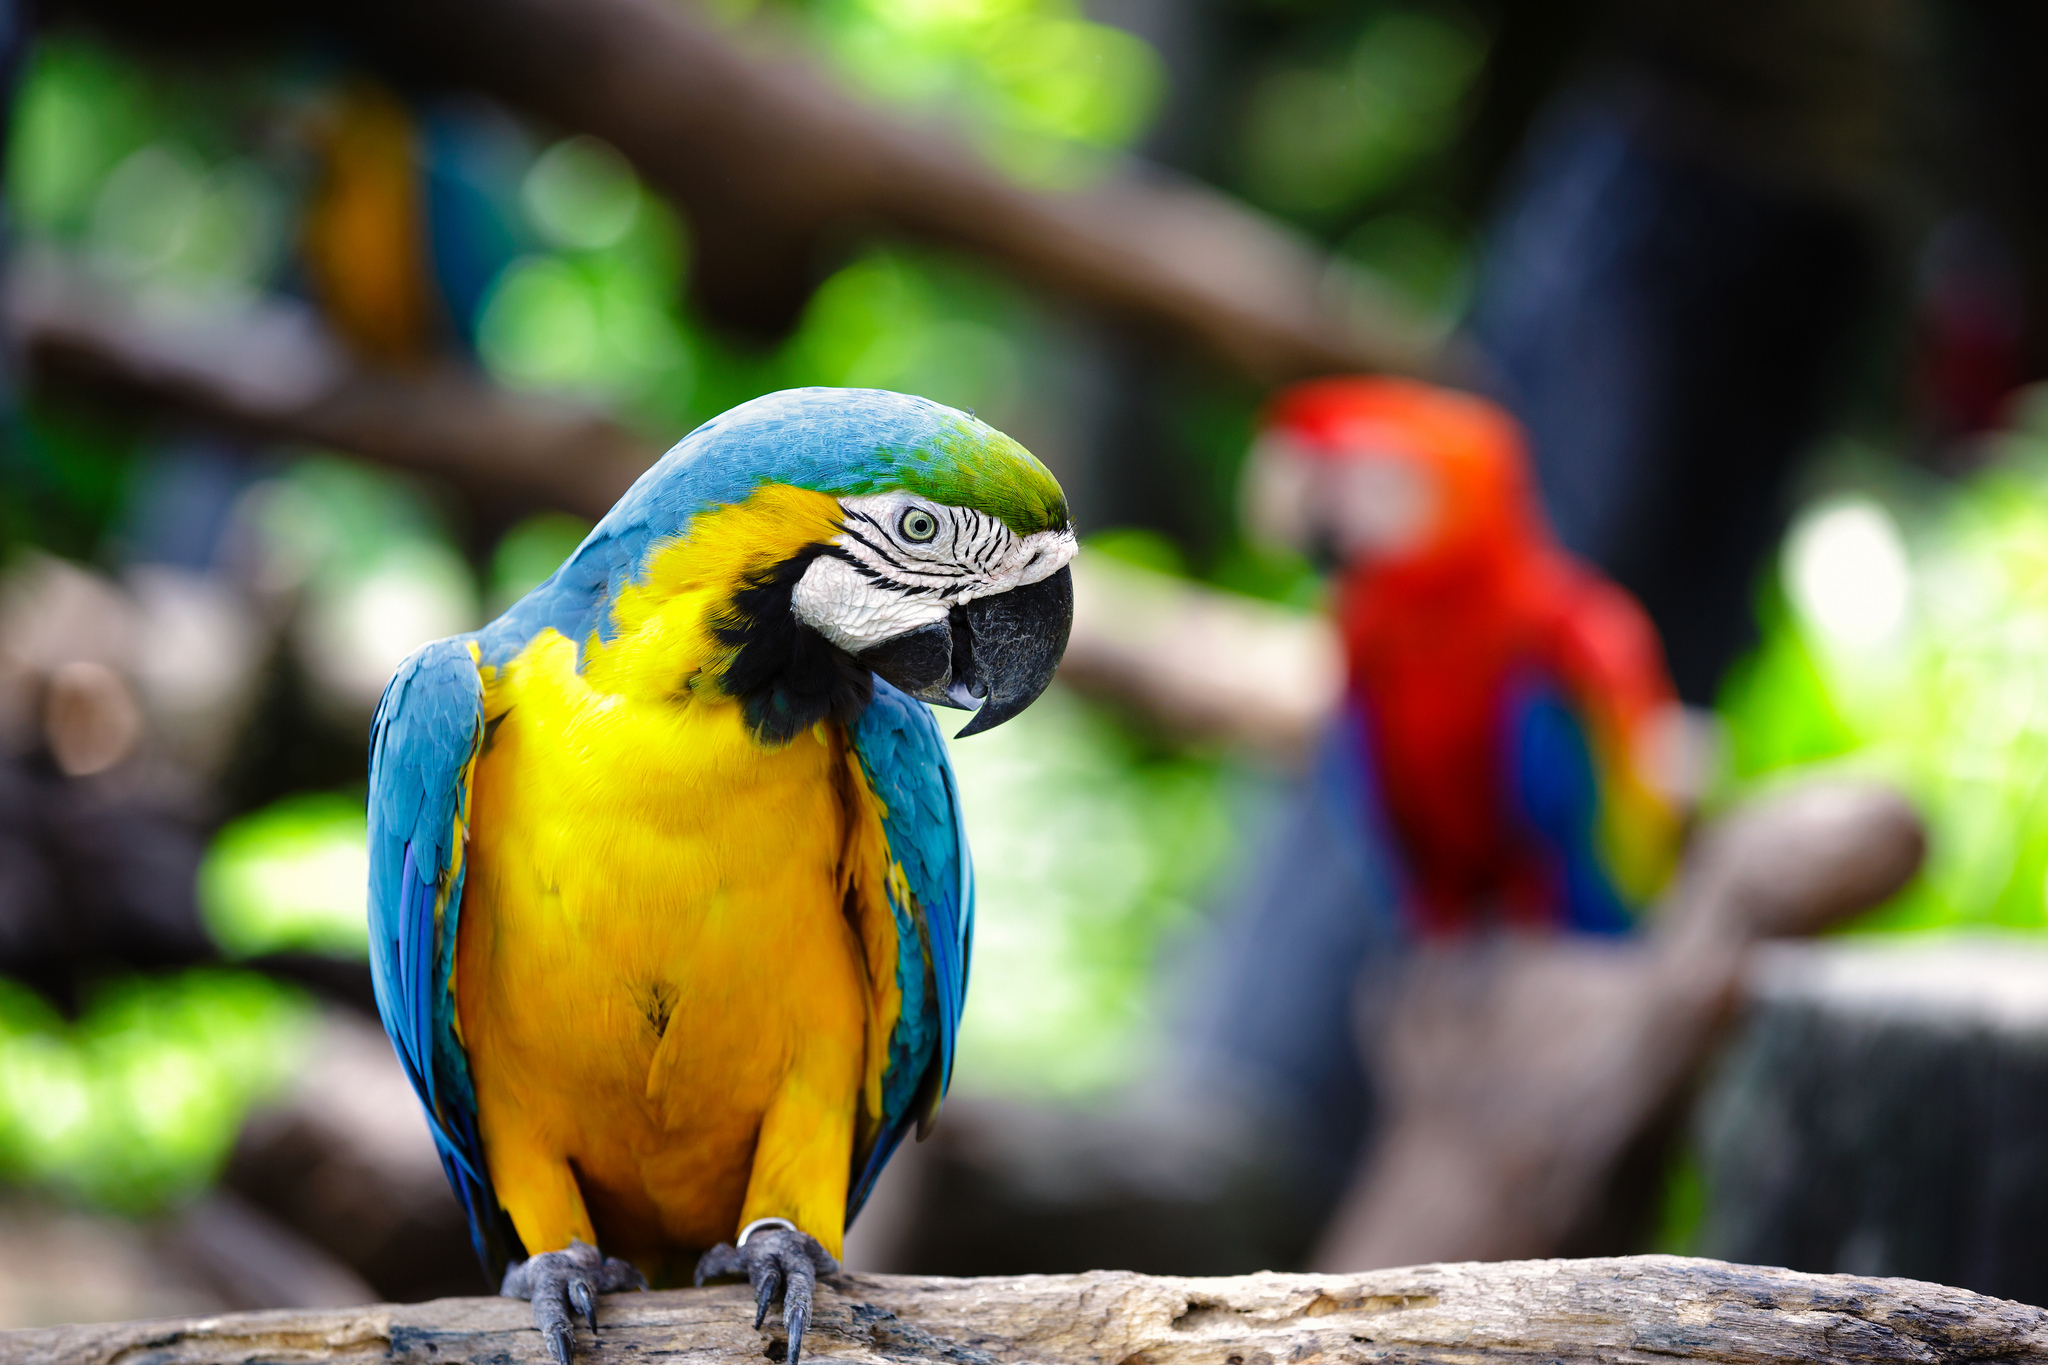 Blue and yellow Macaw HD Wallpaper Background Image 2048x1365